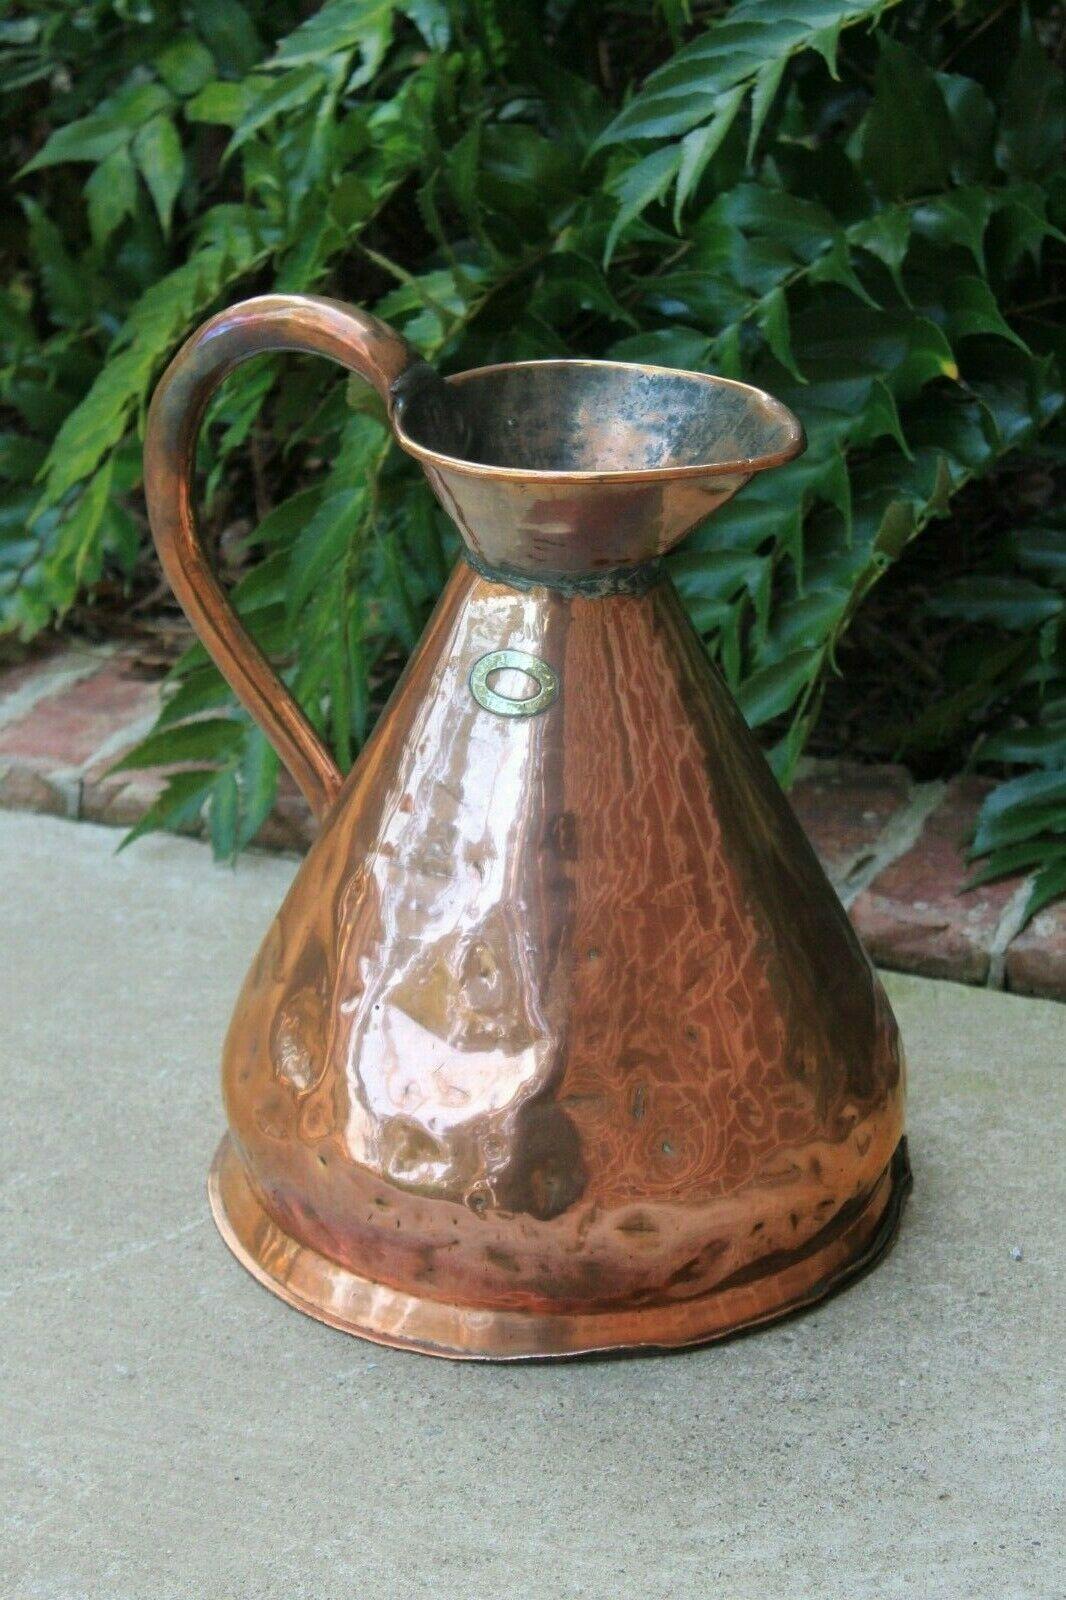 Beautiful Antique English Copper FLAGON, Pitcher, Vessel or Jug #2~~c. 1900 
Excellent heavy copper flagon with hallmark

15